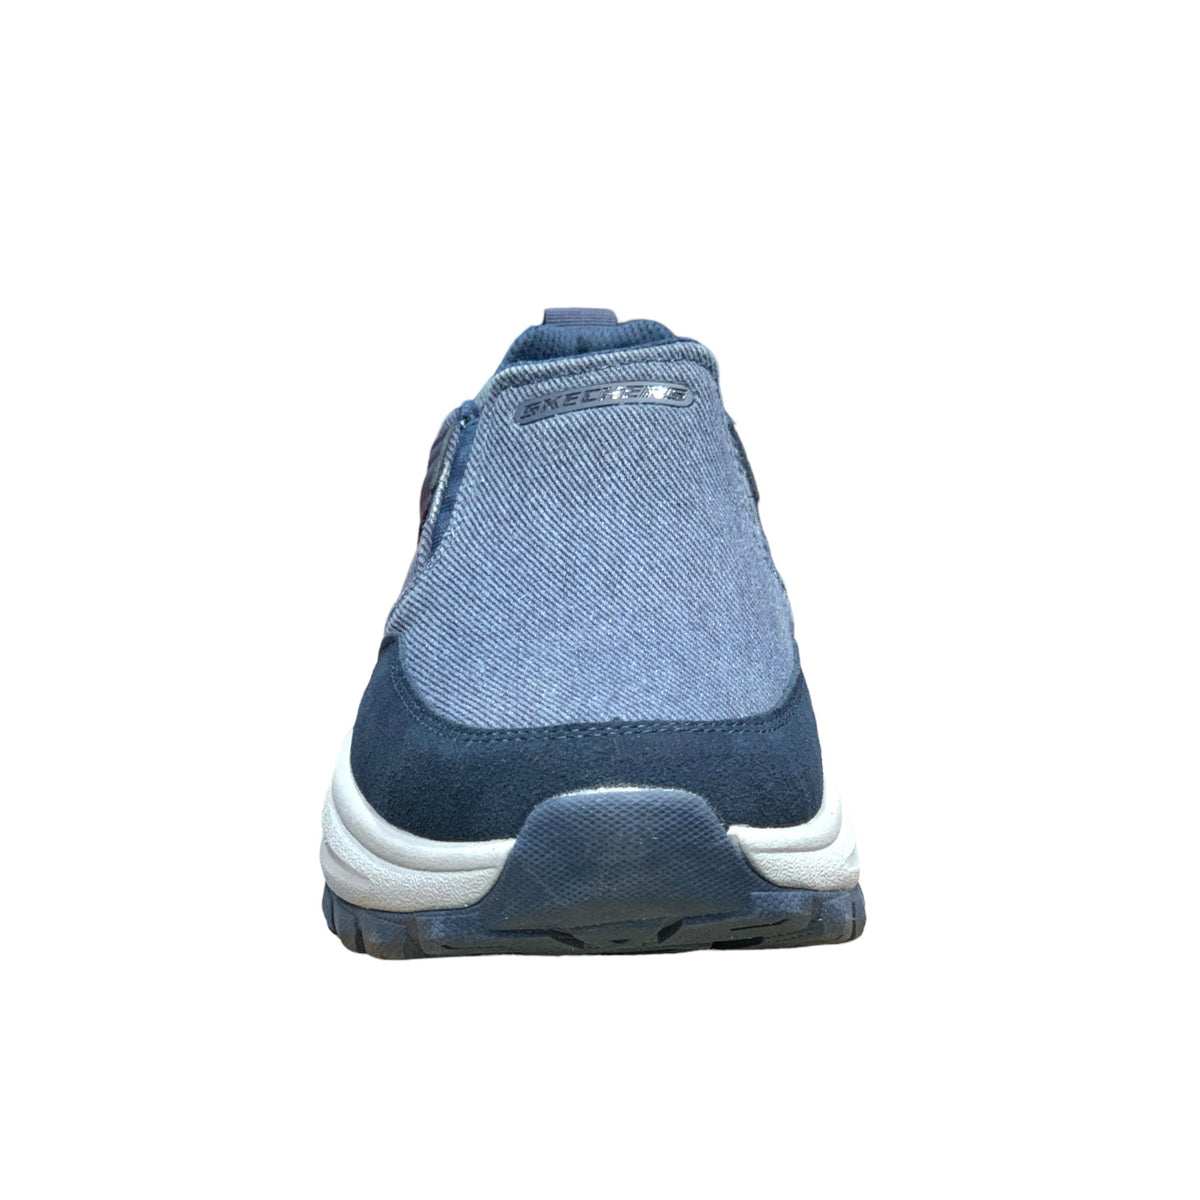 Skechers Good Year Tyre Sole Premium Blue Gray (Dot Perfect)